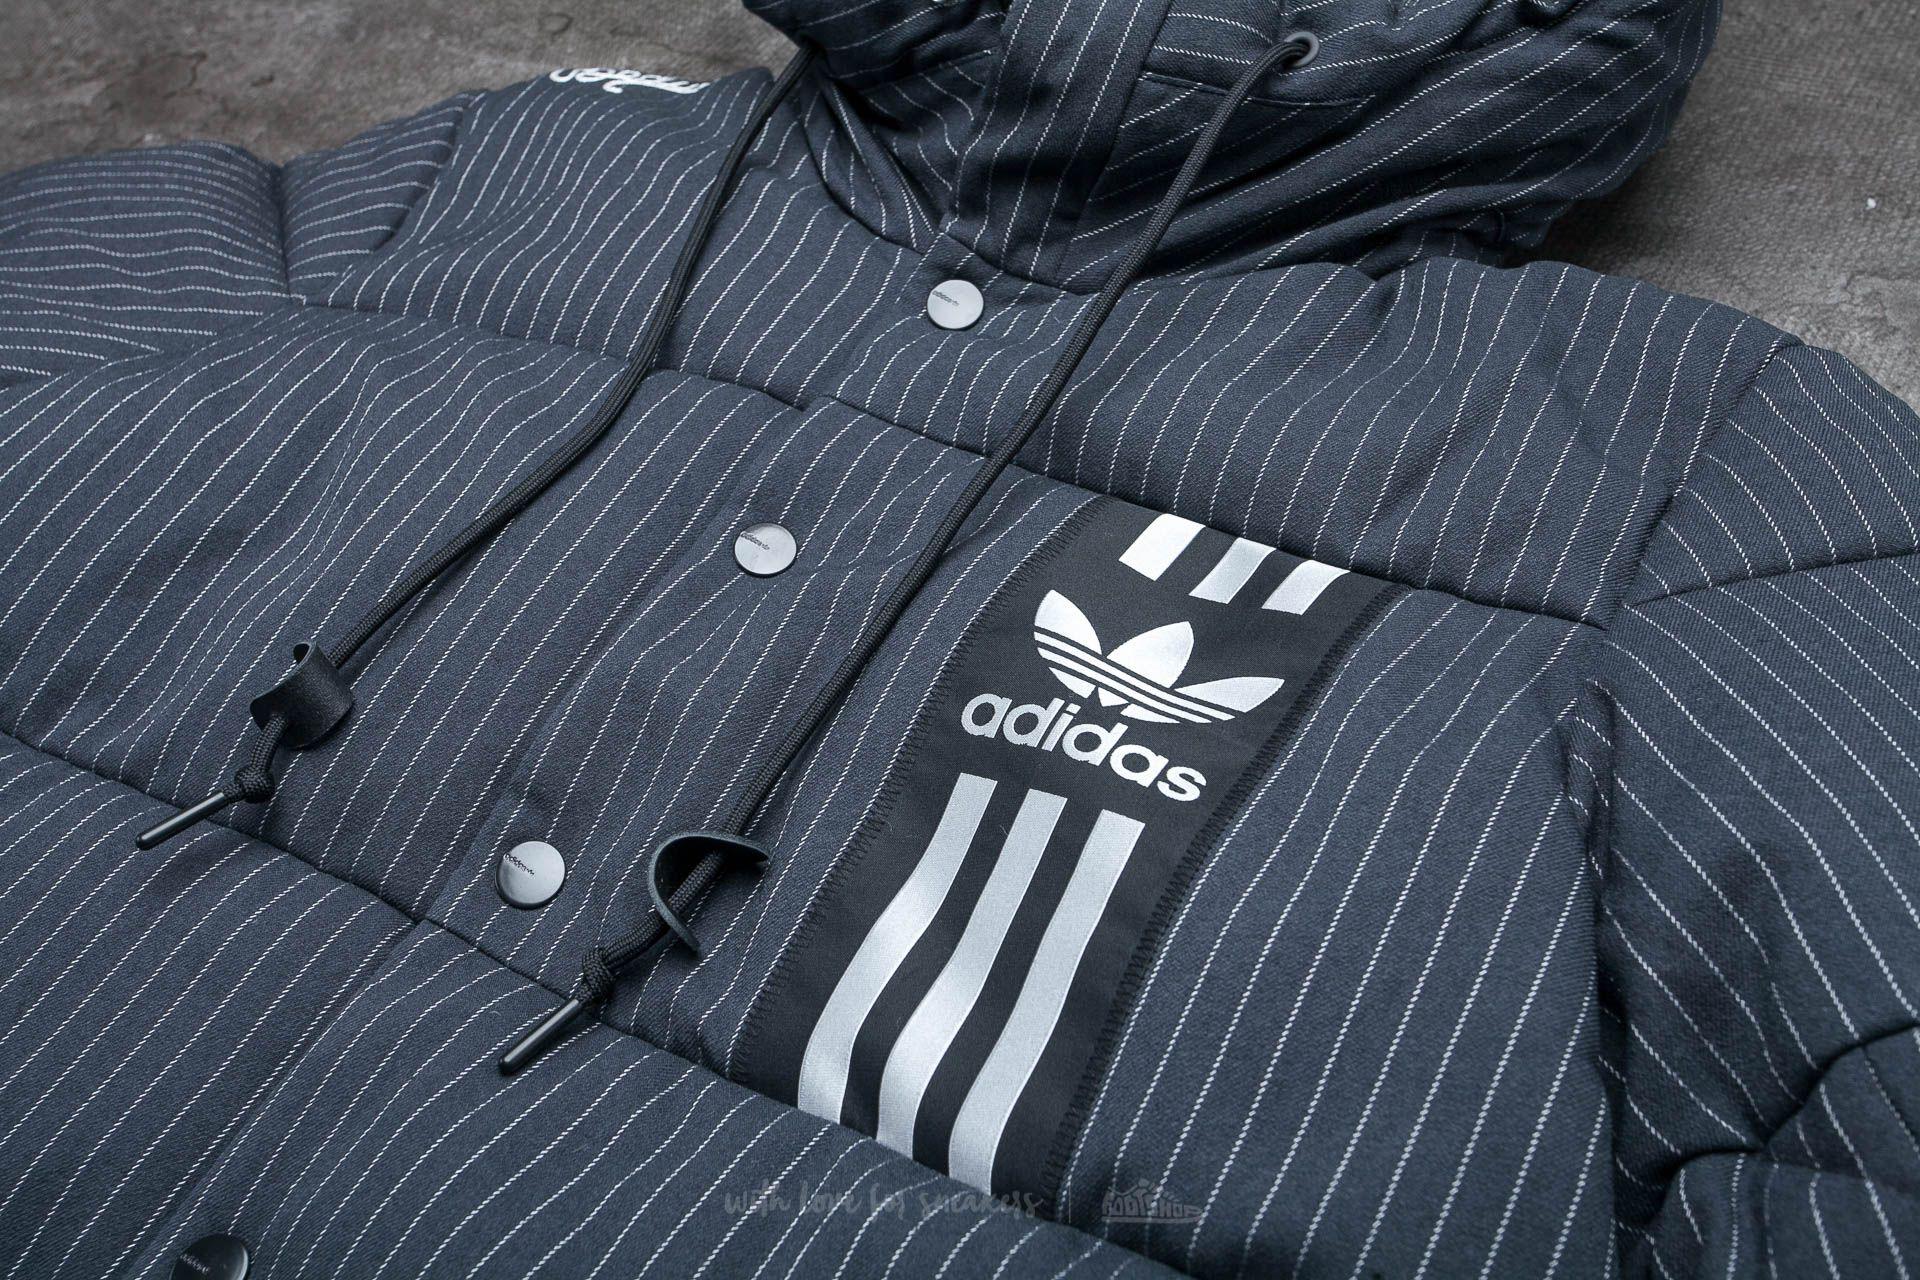 adidas bedwin and the heartbreakers jacket